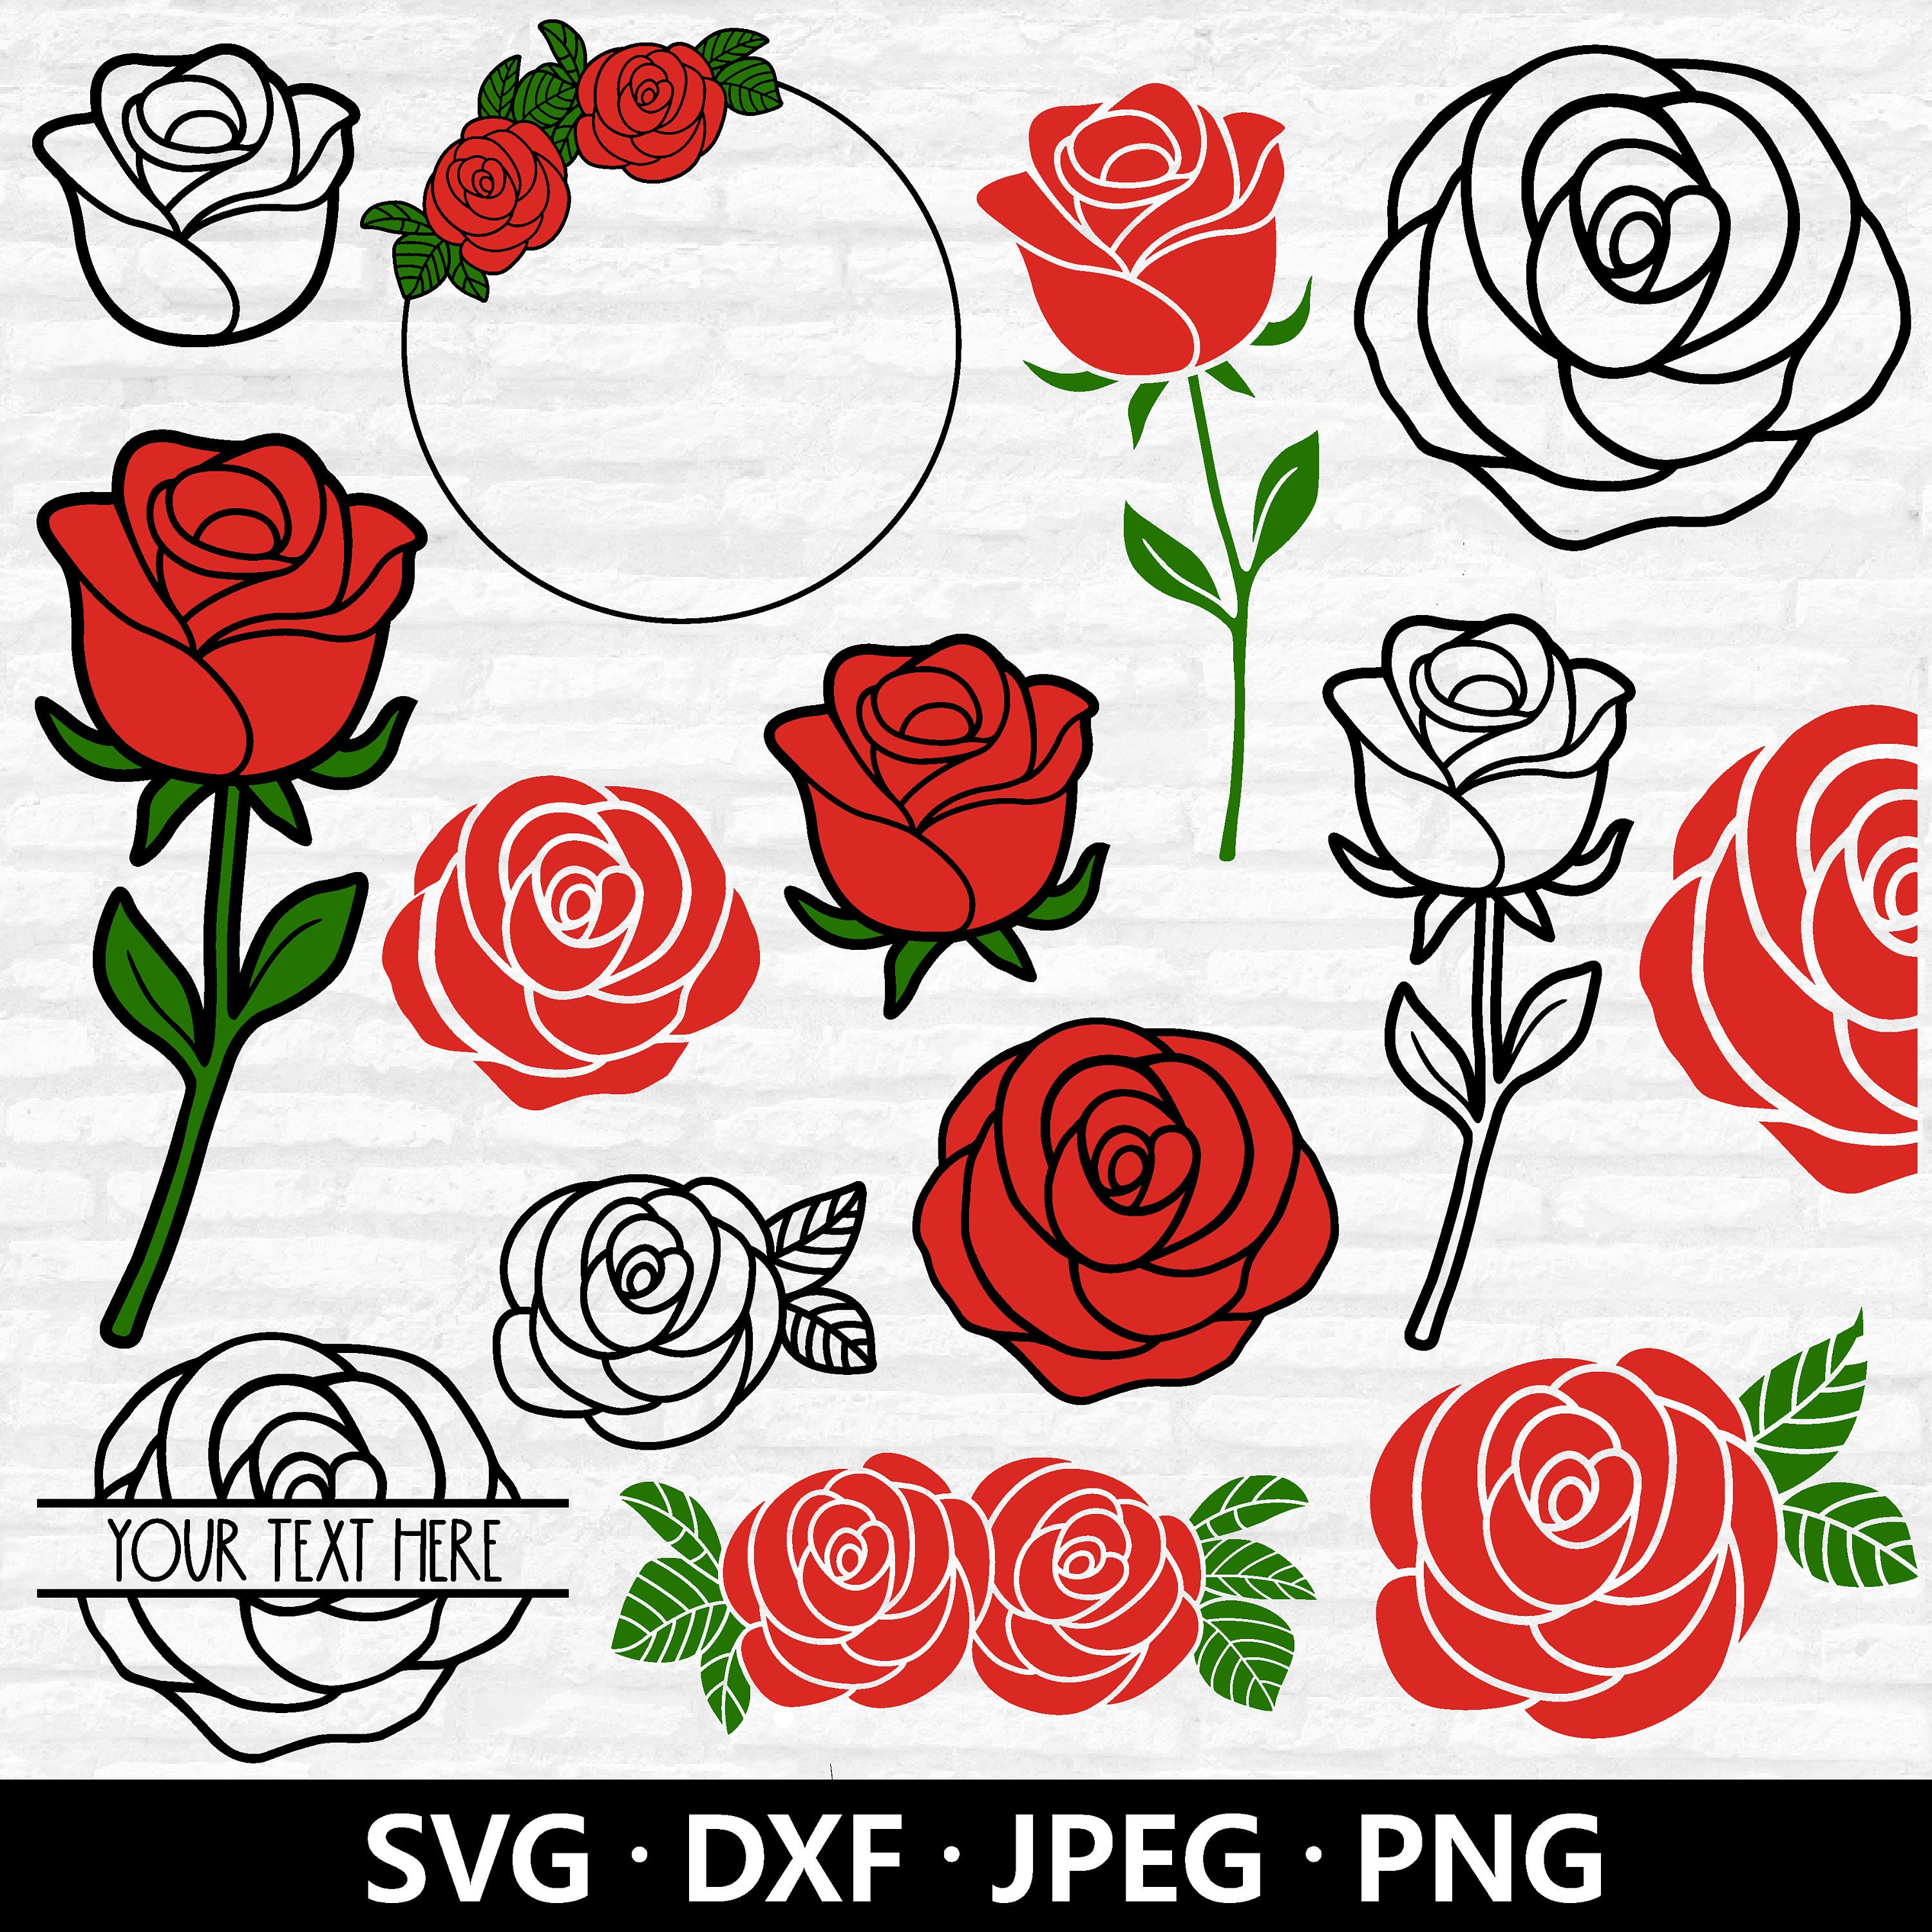 Flower SVG, Rose SVG, Floral Clipart Graphic by 99SiamVector